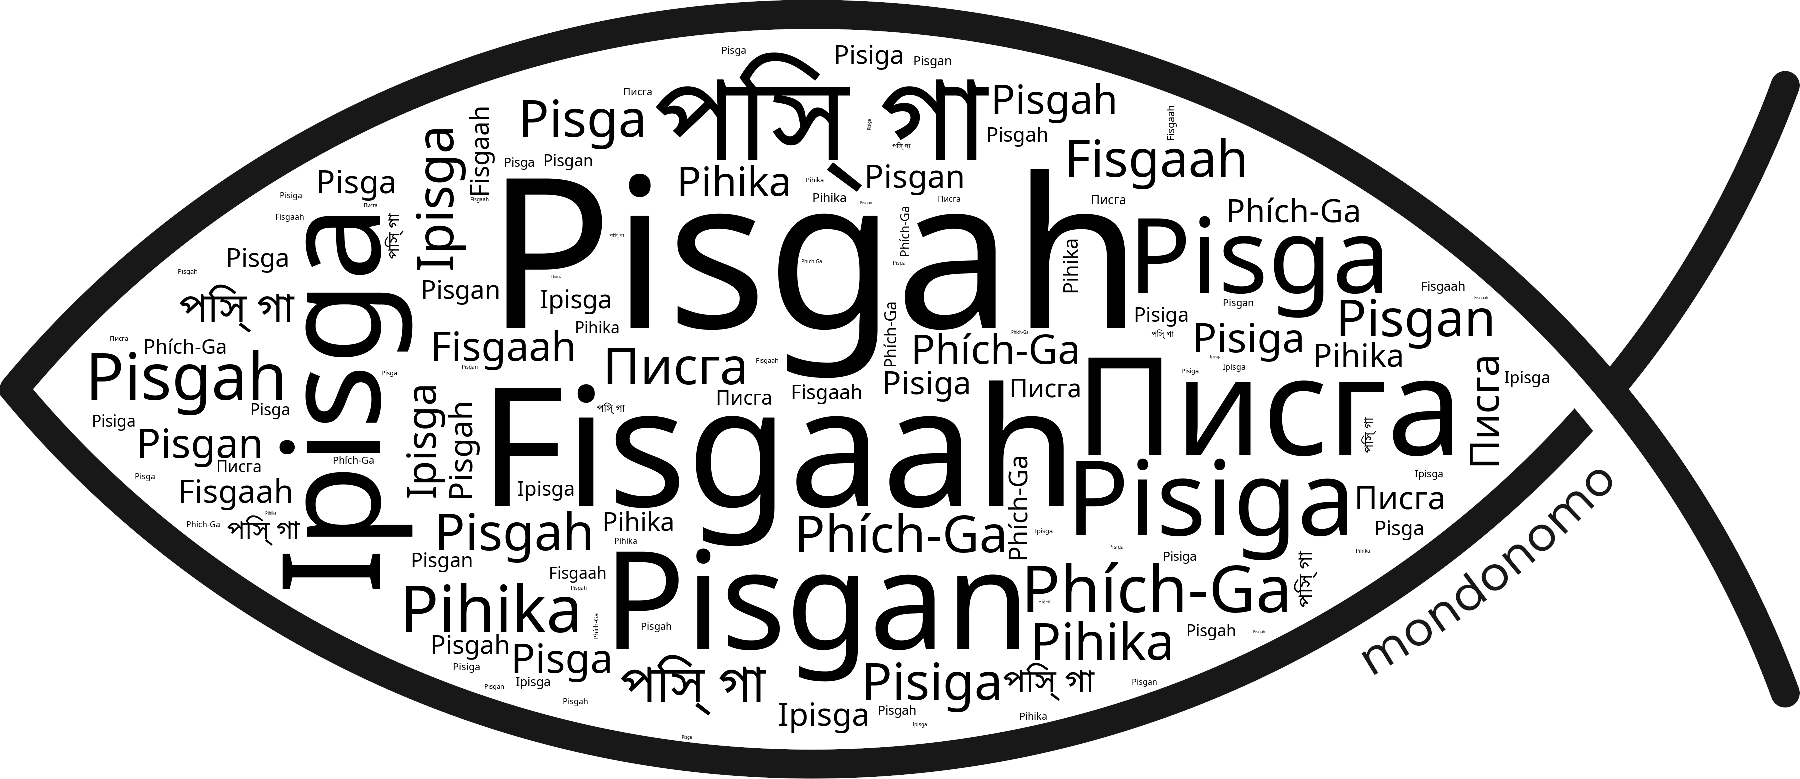 Name Pisgah in the world's Bibles